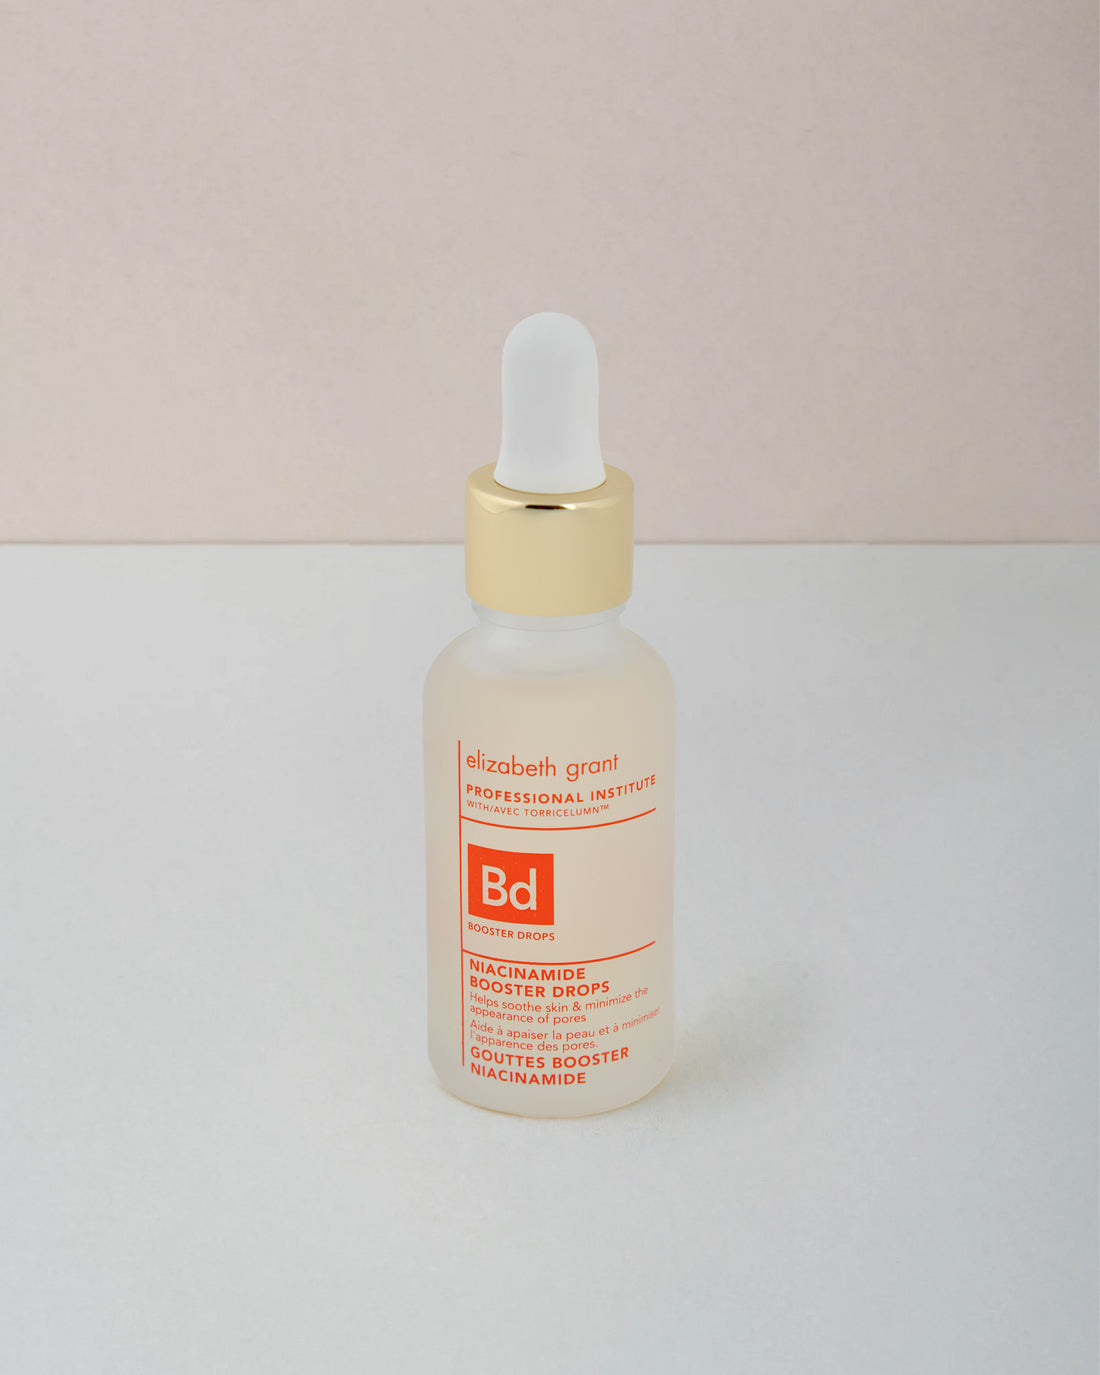 Professional Institute Niacinamide Booster Drops